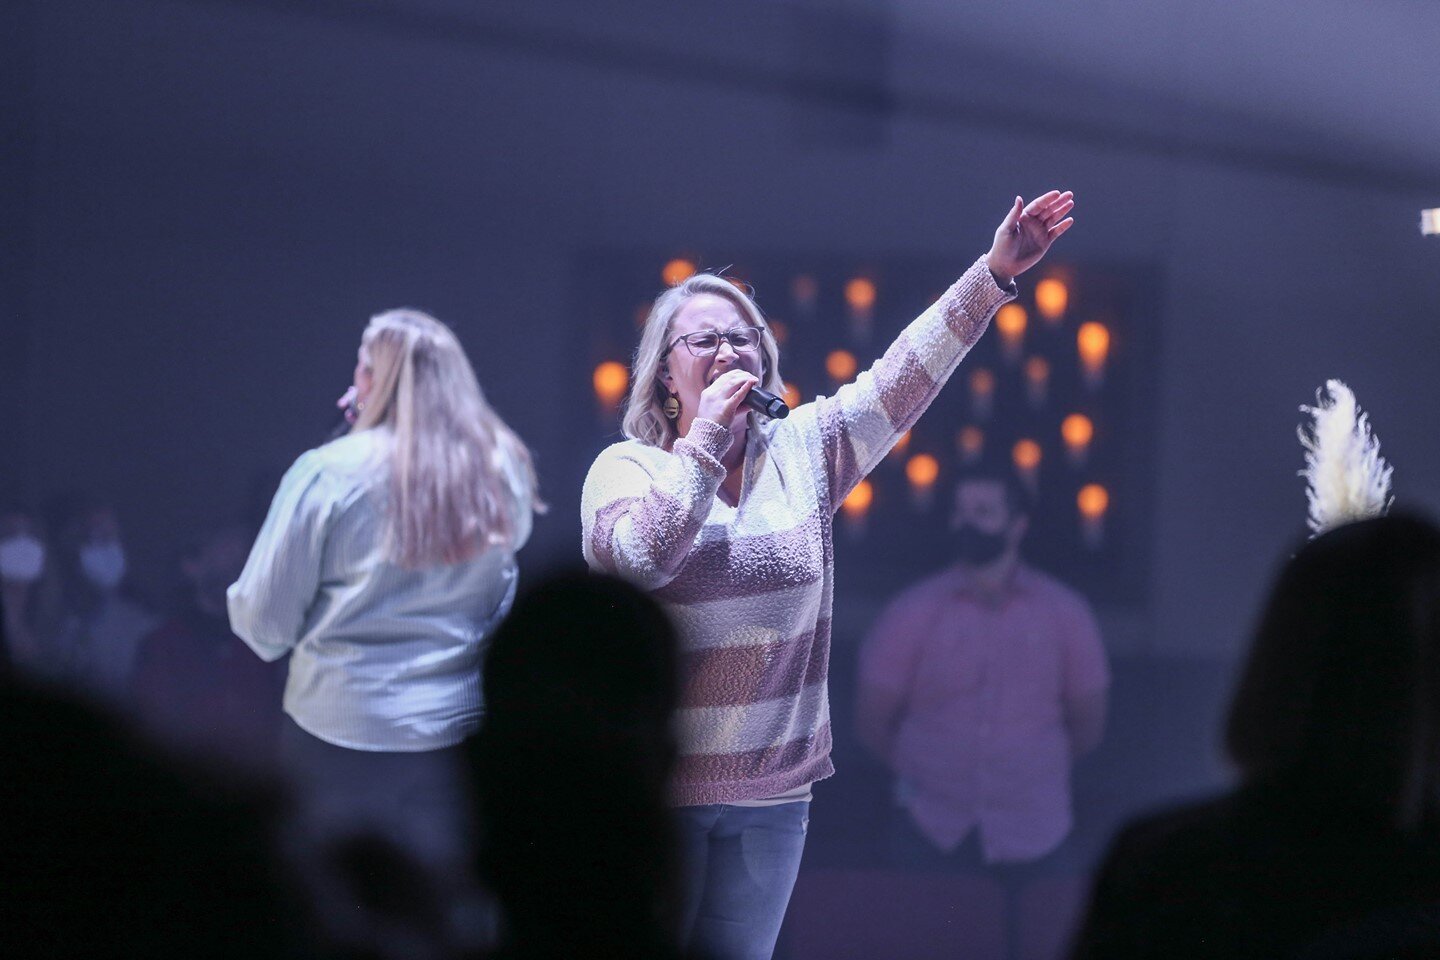 At Beach Church, one of our core pursuits is worship. We seek daily to pursue a relationship with God both corporately and privately in worship.